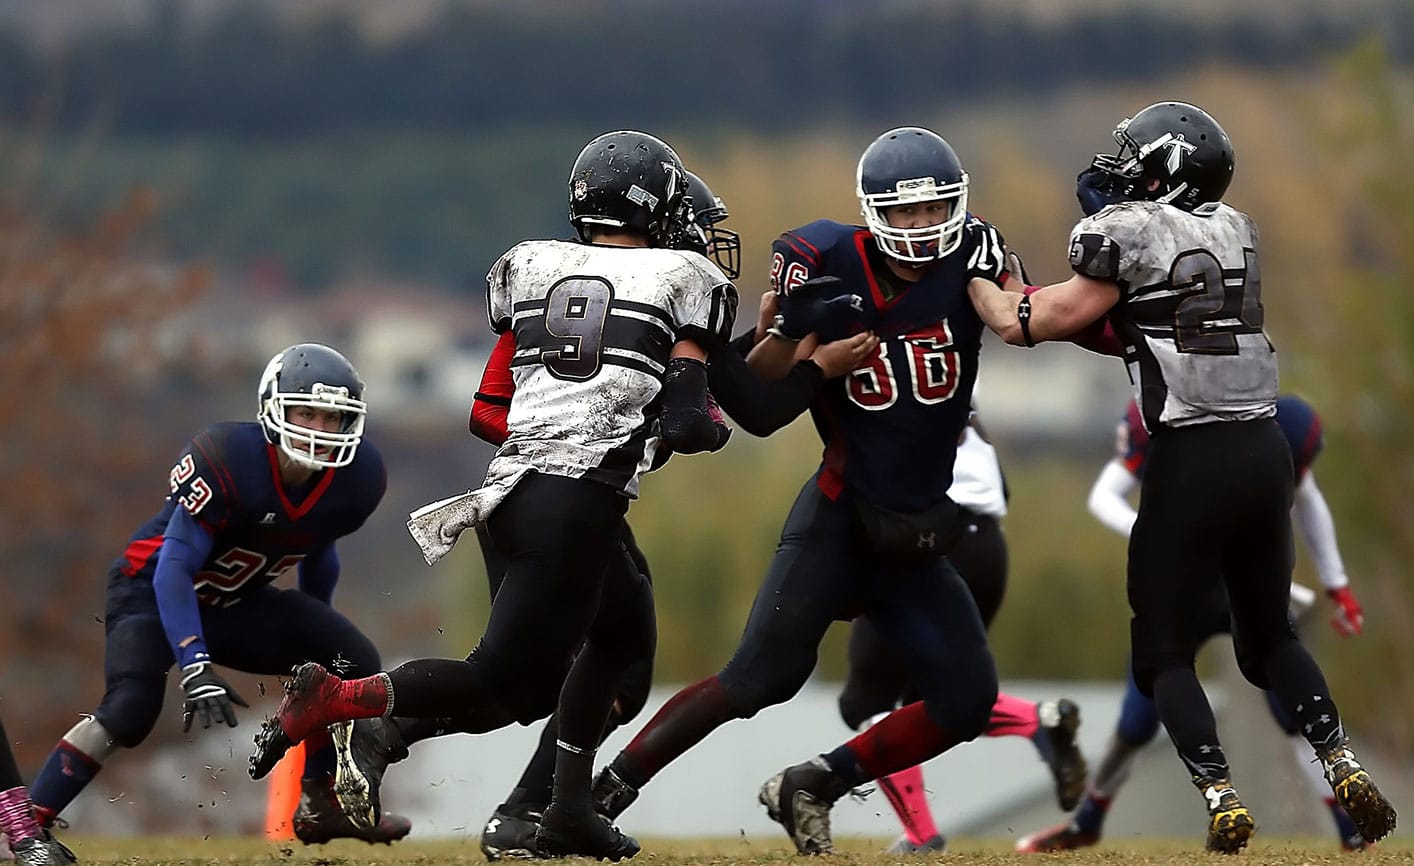 Dr. Shelina Babul part of pan-Canadian NFL-funded study on concussion in youth